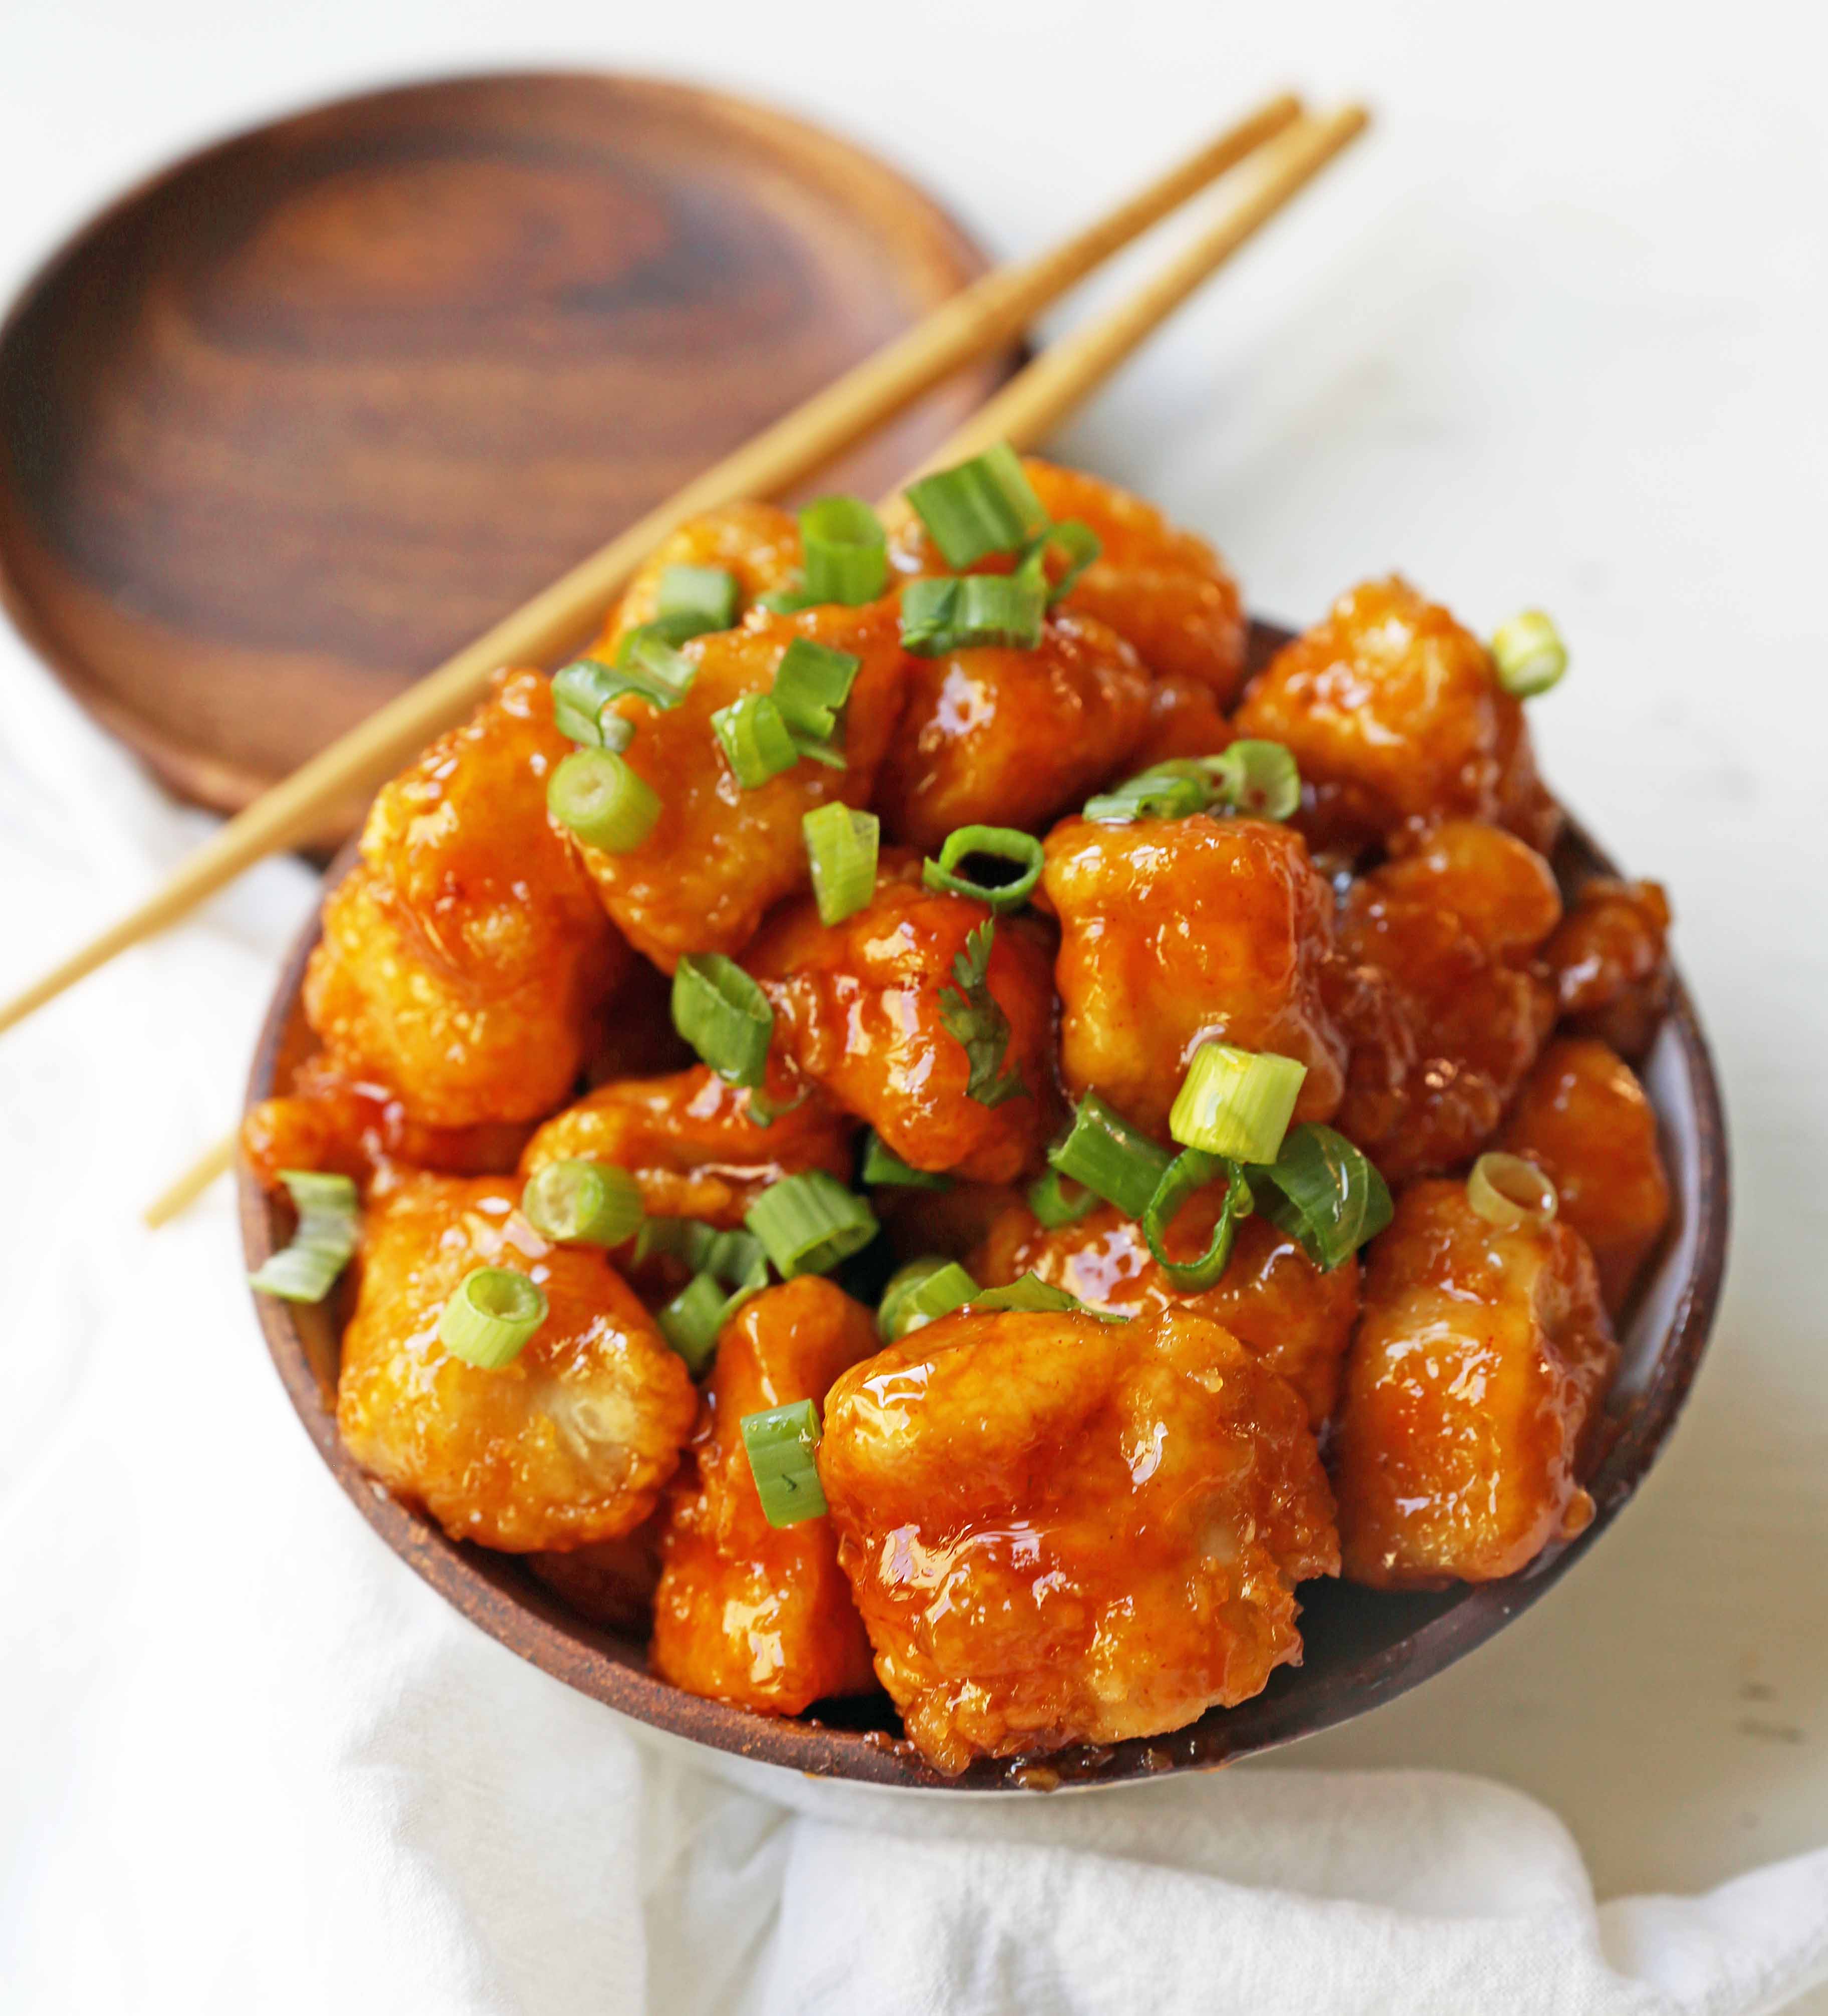 Firecracker Chicken. Sweet and spicy chicken bites made with tender chicken, flash-fried, and baked in a sweet brown sugar buffalo sauce. You'll have people coming back for seconds in no time at all! www.modernhoney.com #firecrackerchicken #buffalochicken #chicken #chickenbites 